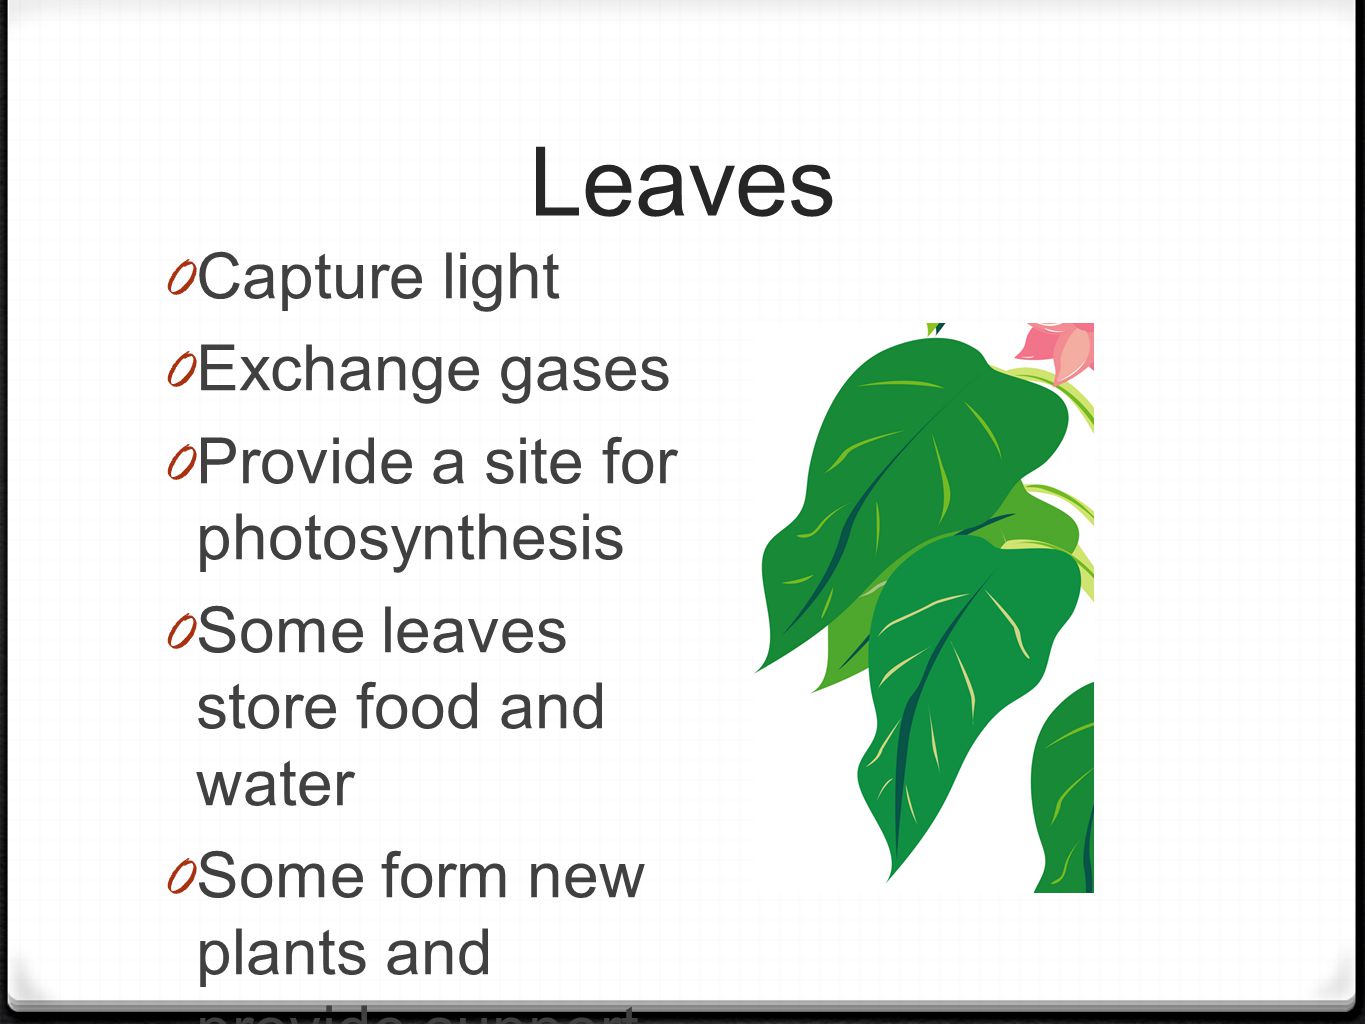 Leaves 0 Capture light 0 Exchange gases 0 Provide a site for photosynthesis 0 Some leaves store food and water 0 Some form new plants and provide support